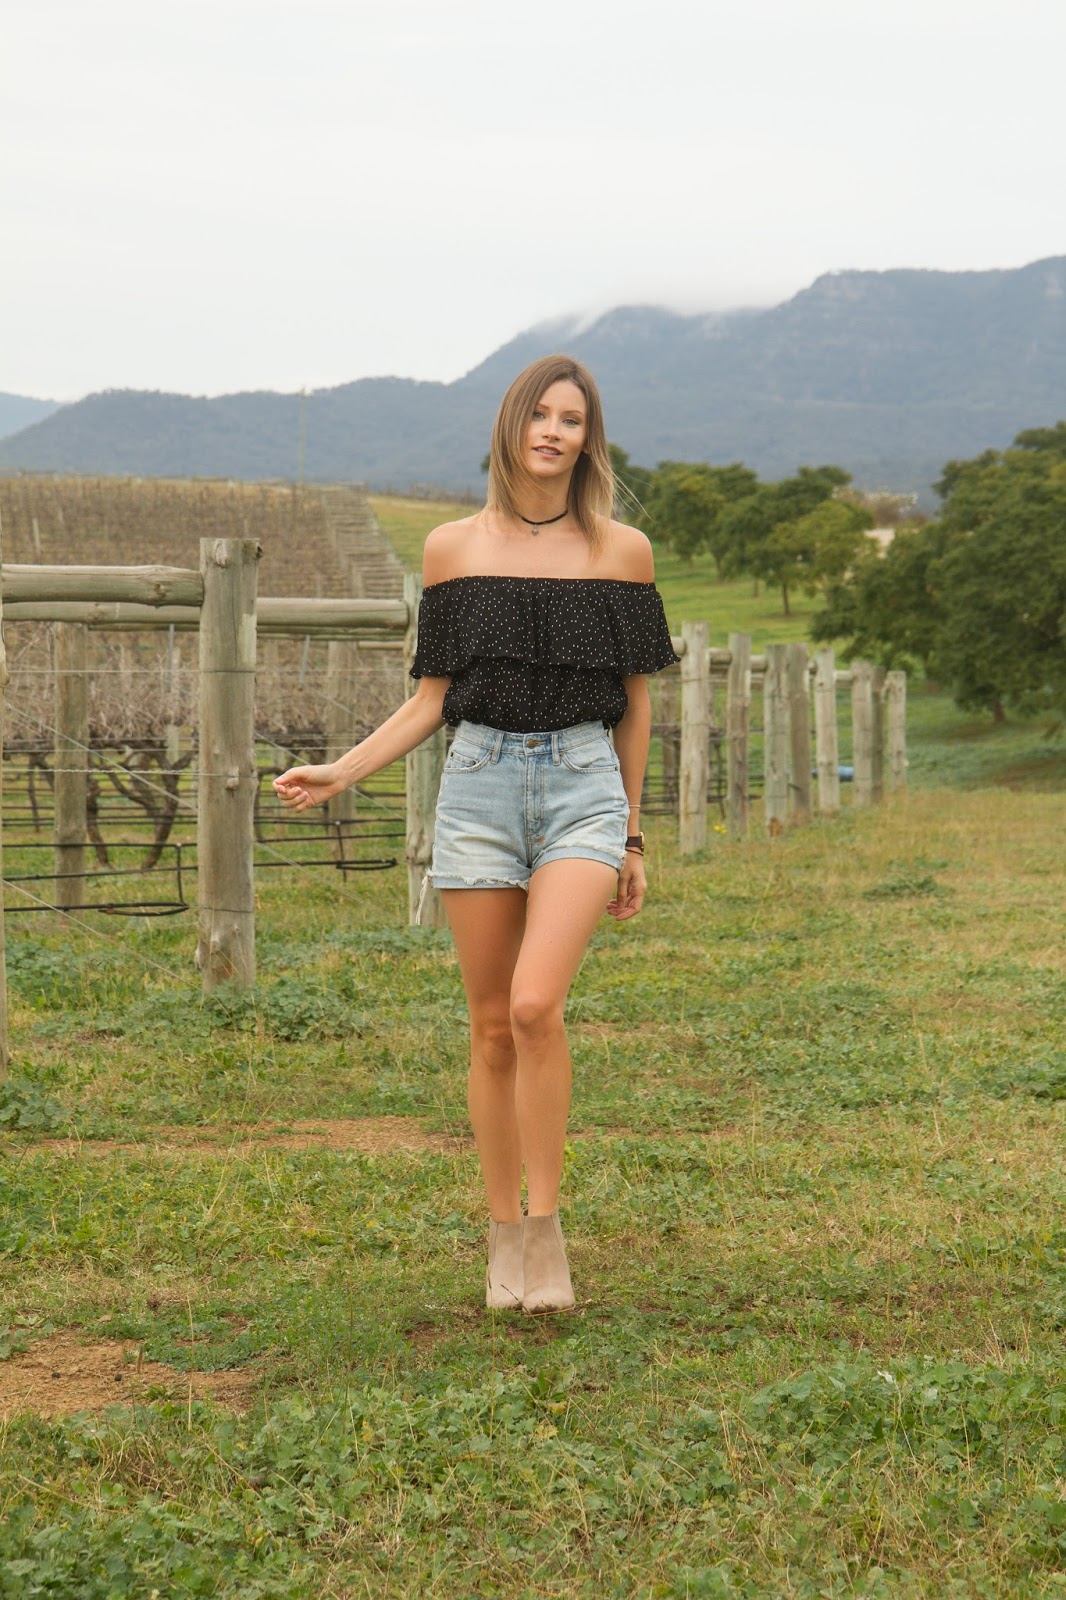 Fashion and travel blogger, Alison Hutchinson, is wearing a Topshop Bardot top, Ksubi denim shorts and Witchery beige ankle boots in the Hunter Valley, Australia